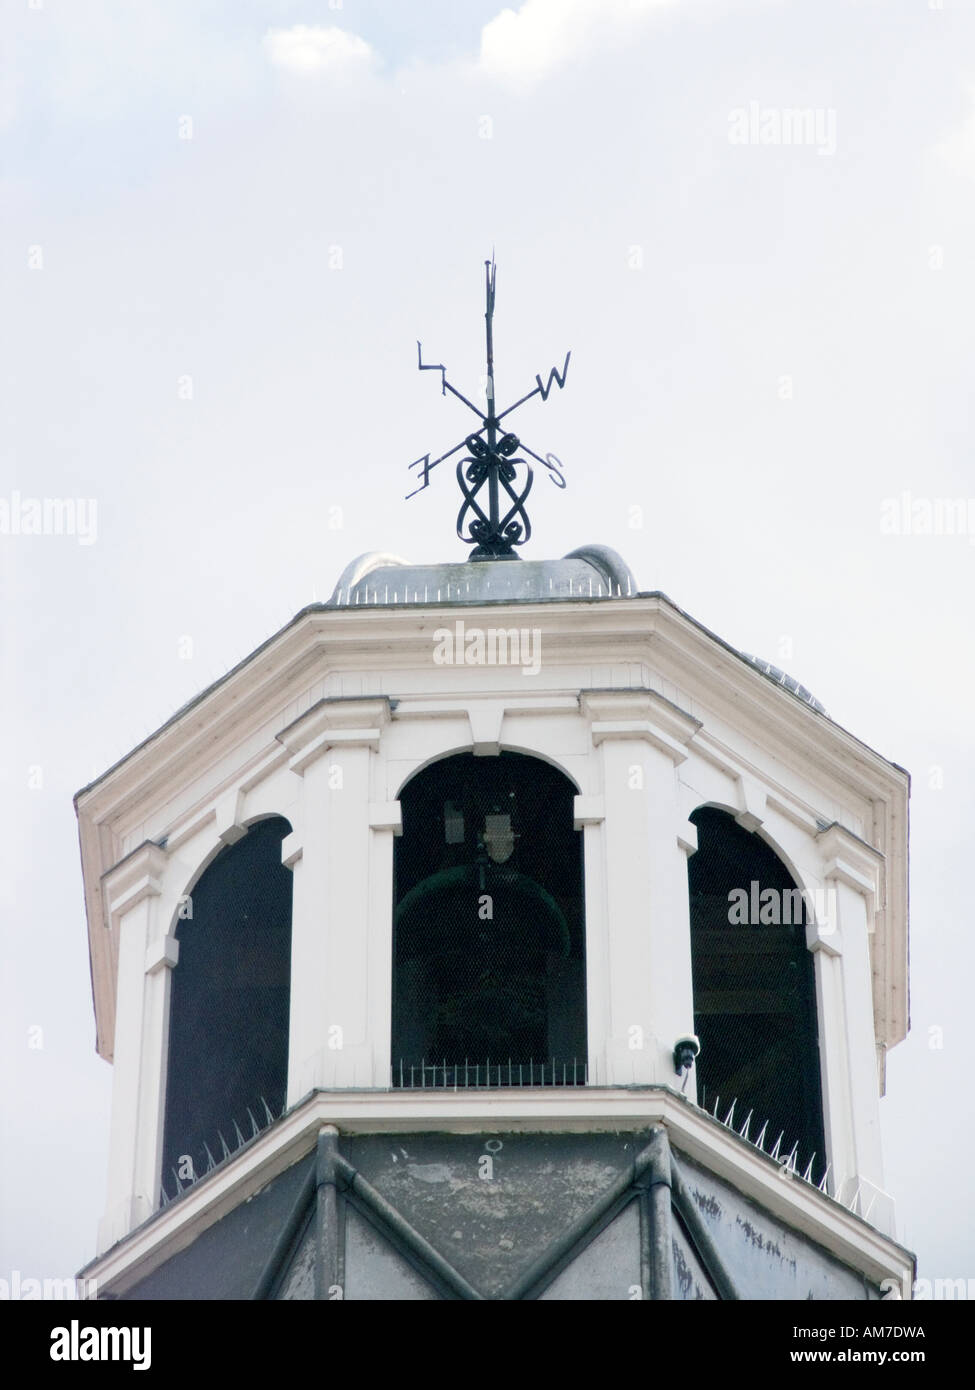 Weather vane on top of the town hall tower Marlborough Wiltshire UK Stock Photo